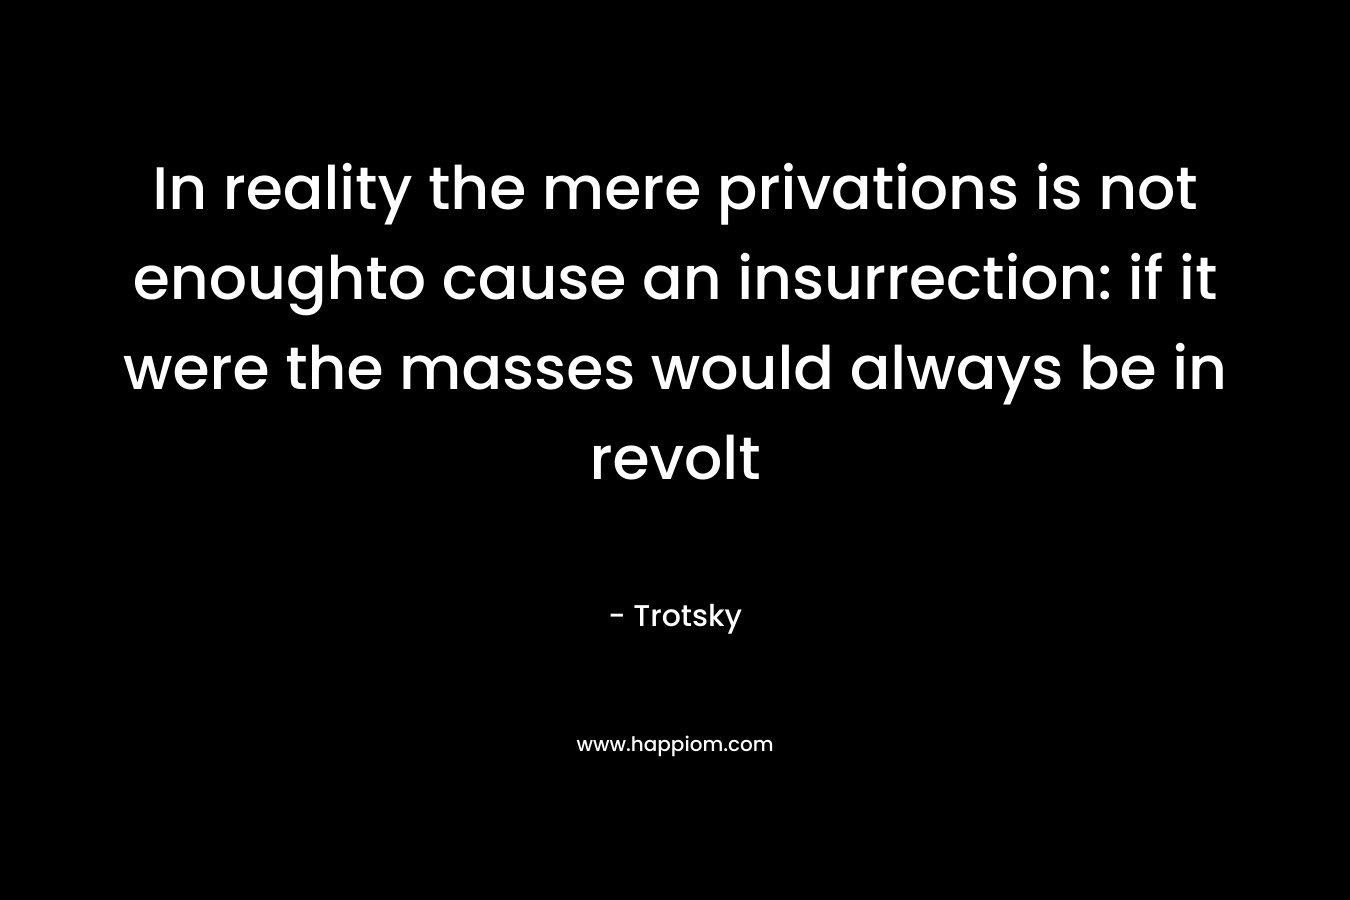 In reality the mere privations is not enoughto cause an insurrection: if it were the masses would always be in revolt